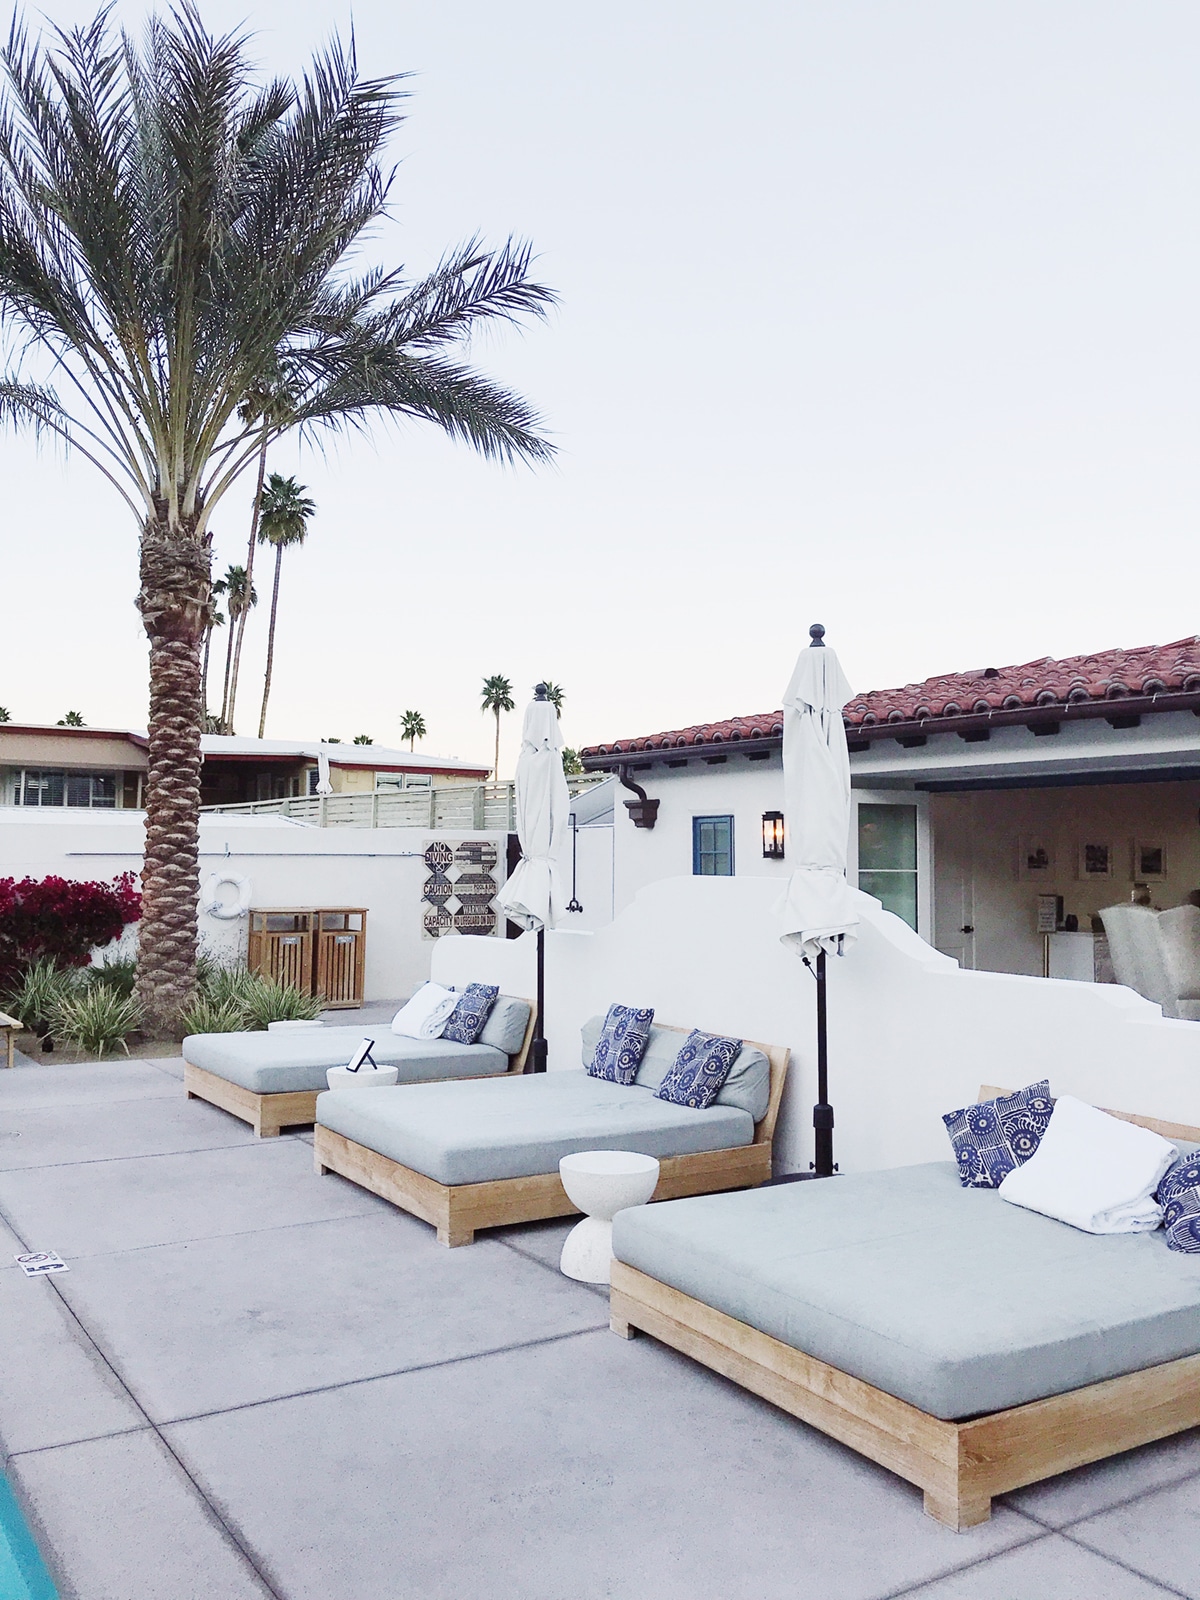 lounge area by the pool | tour of la serena villas palm springs on coco kelley